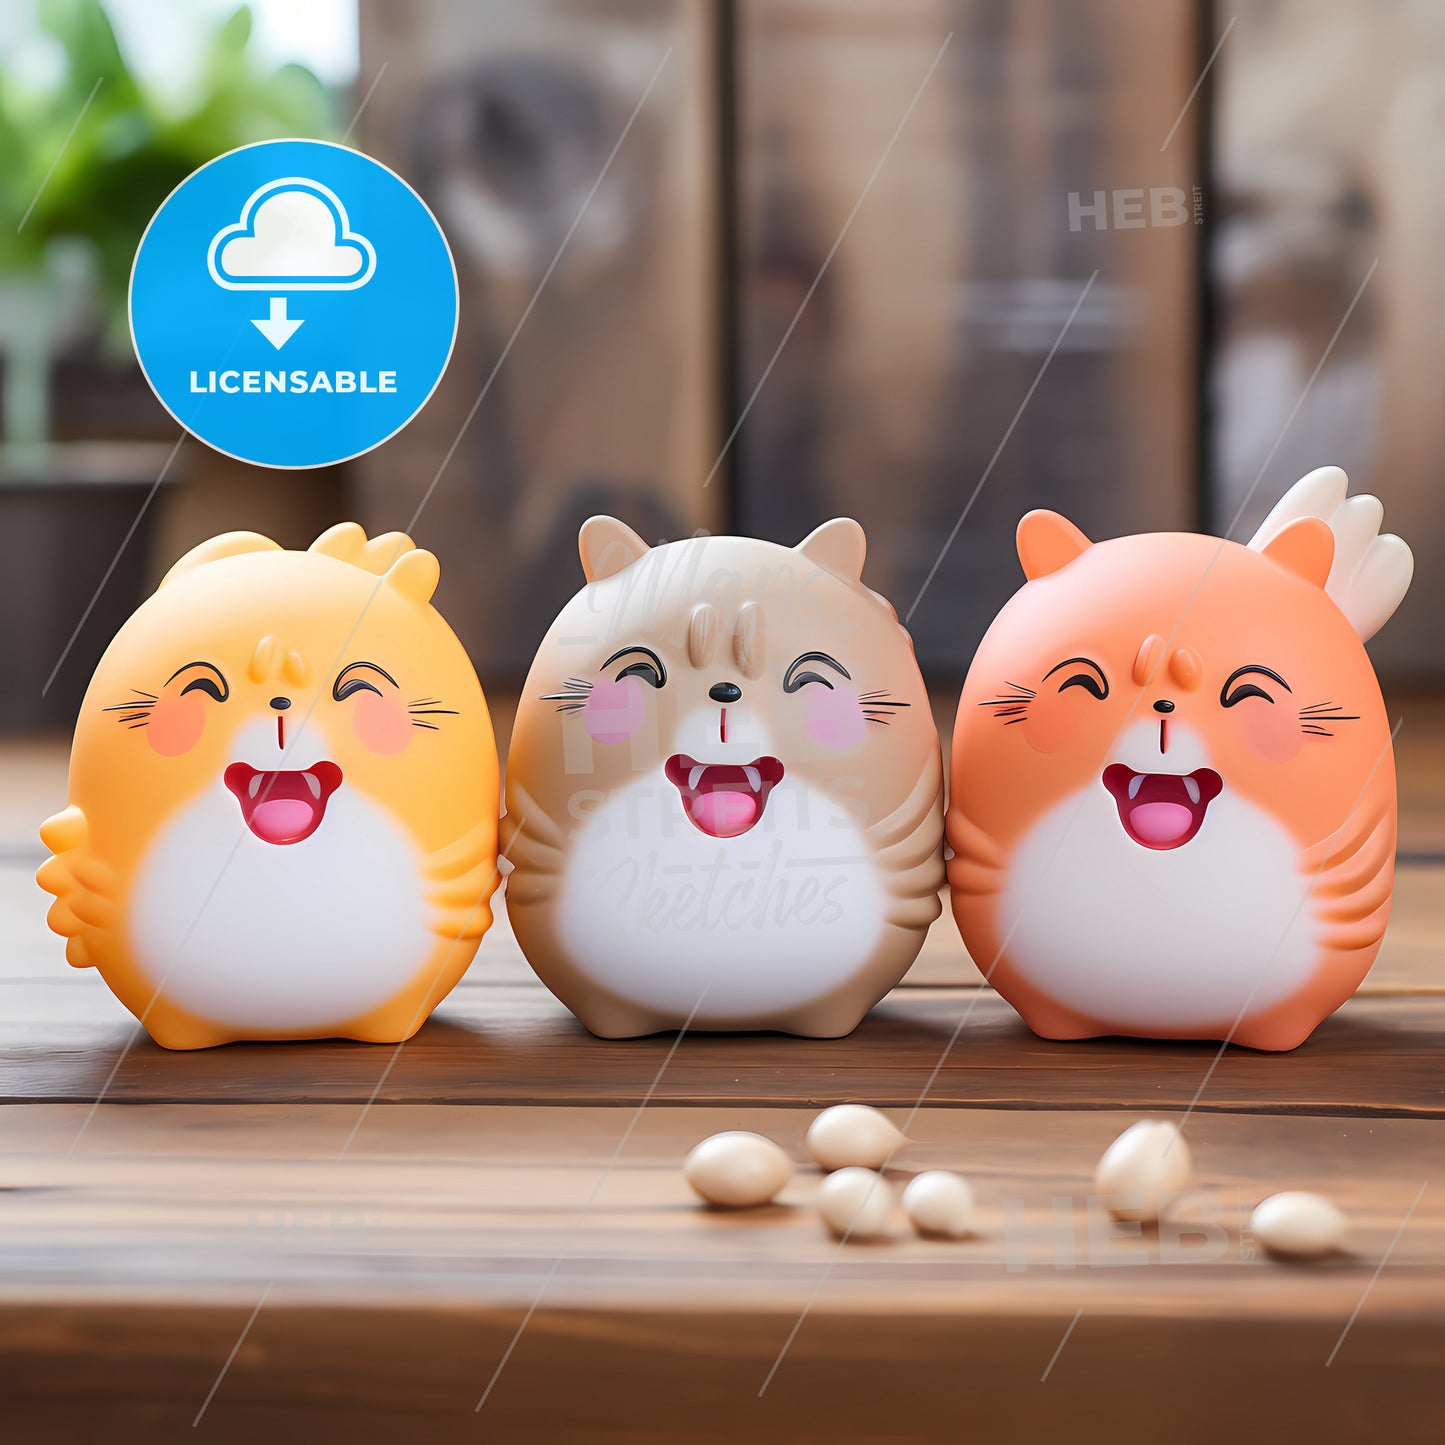 A Group Of Small Plastic Cats